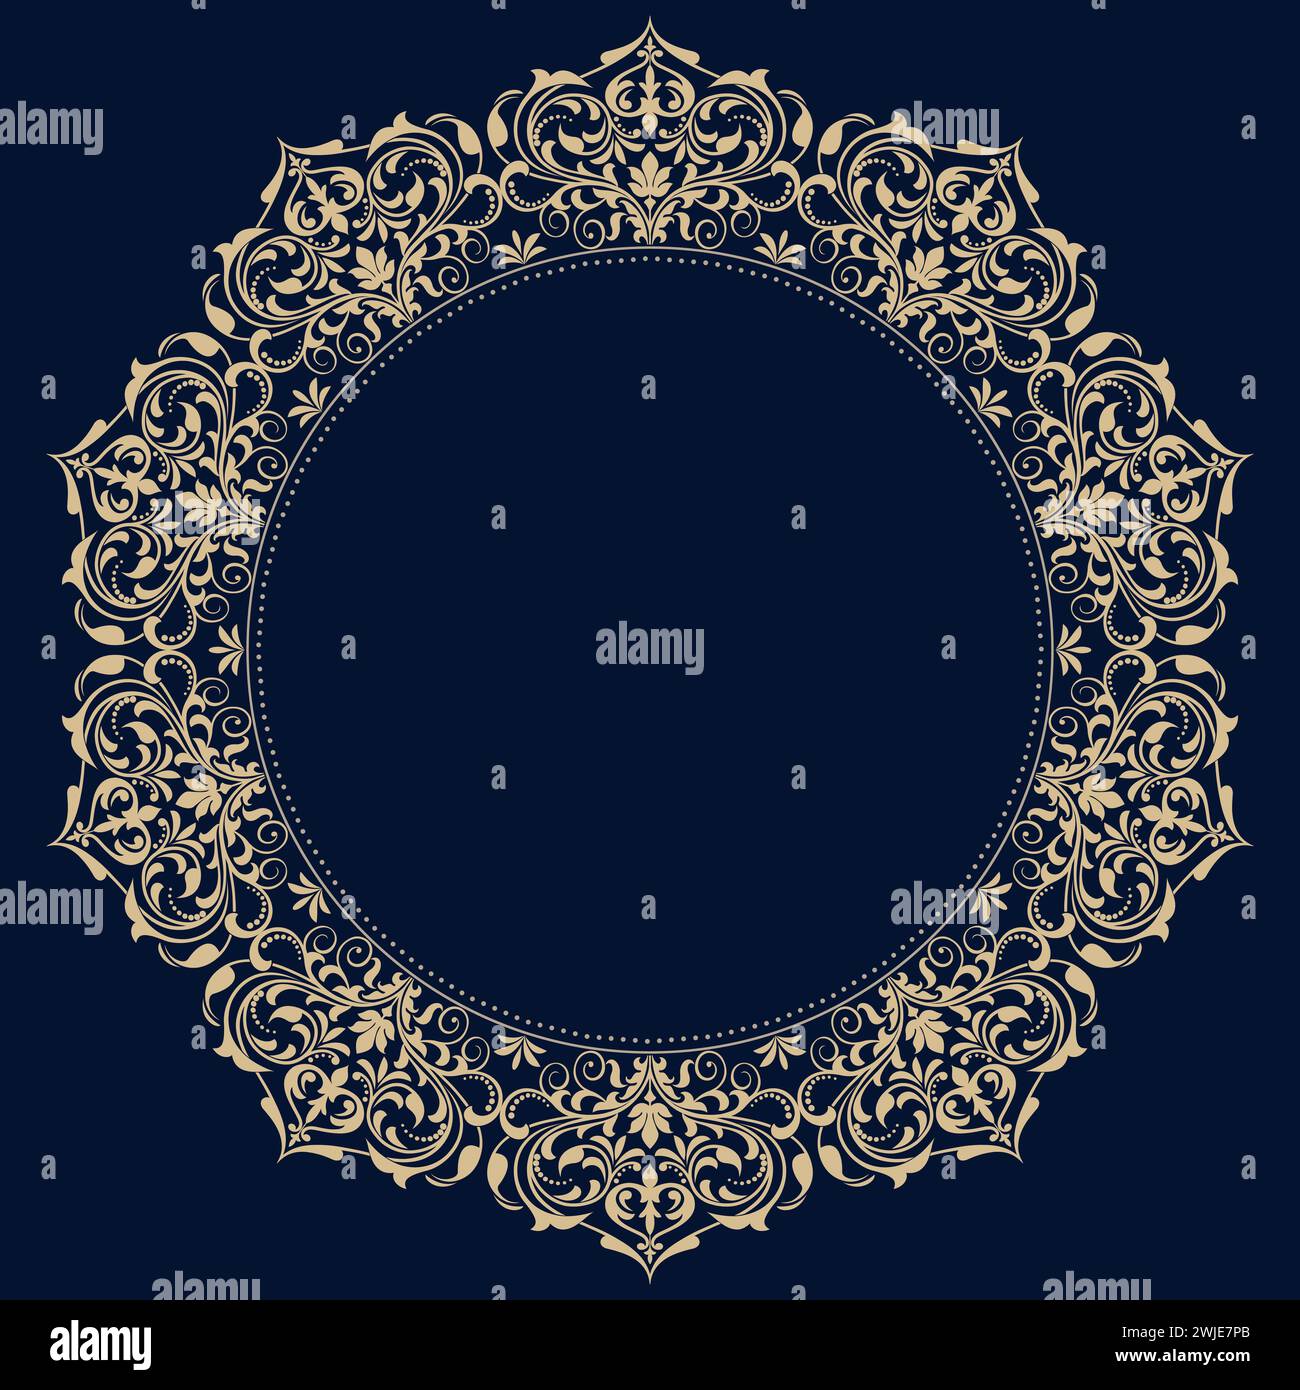 Dark blue and gold floral border. Lace vector illustration for invitations and greeting cards Stock Vector